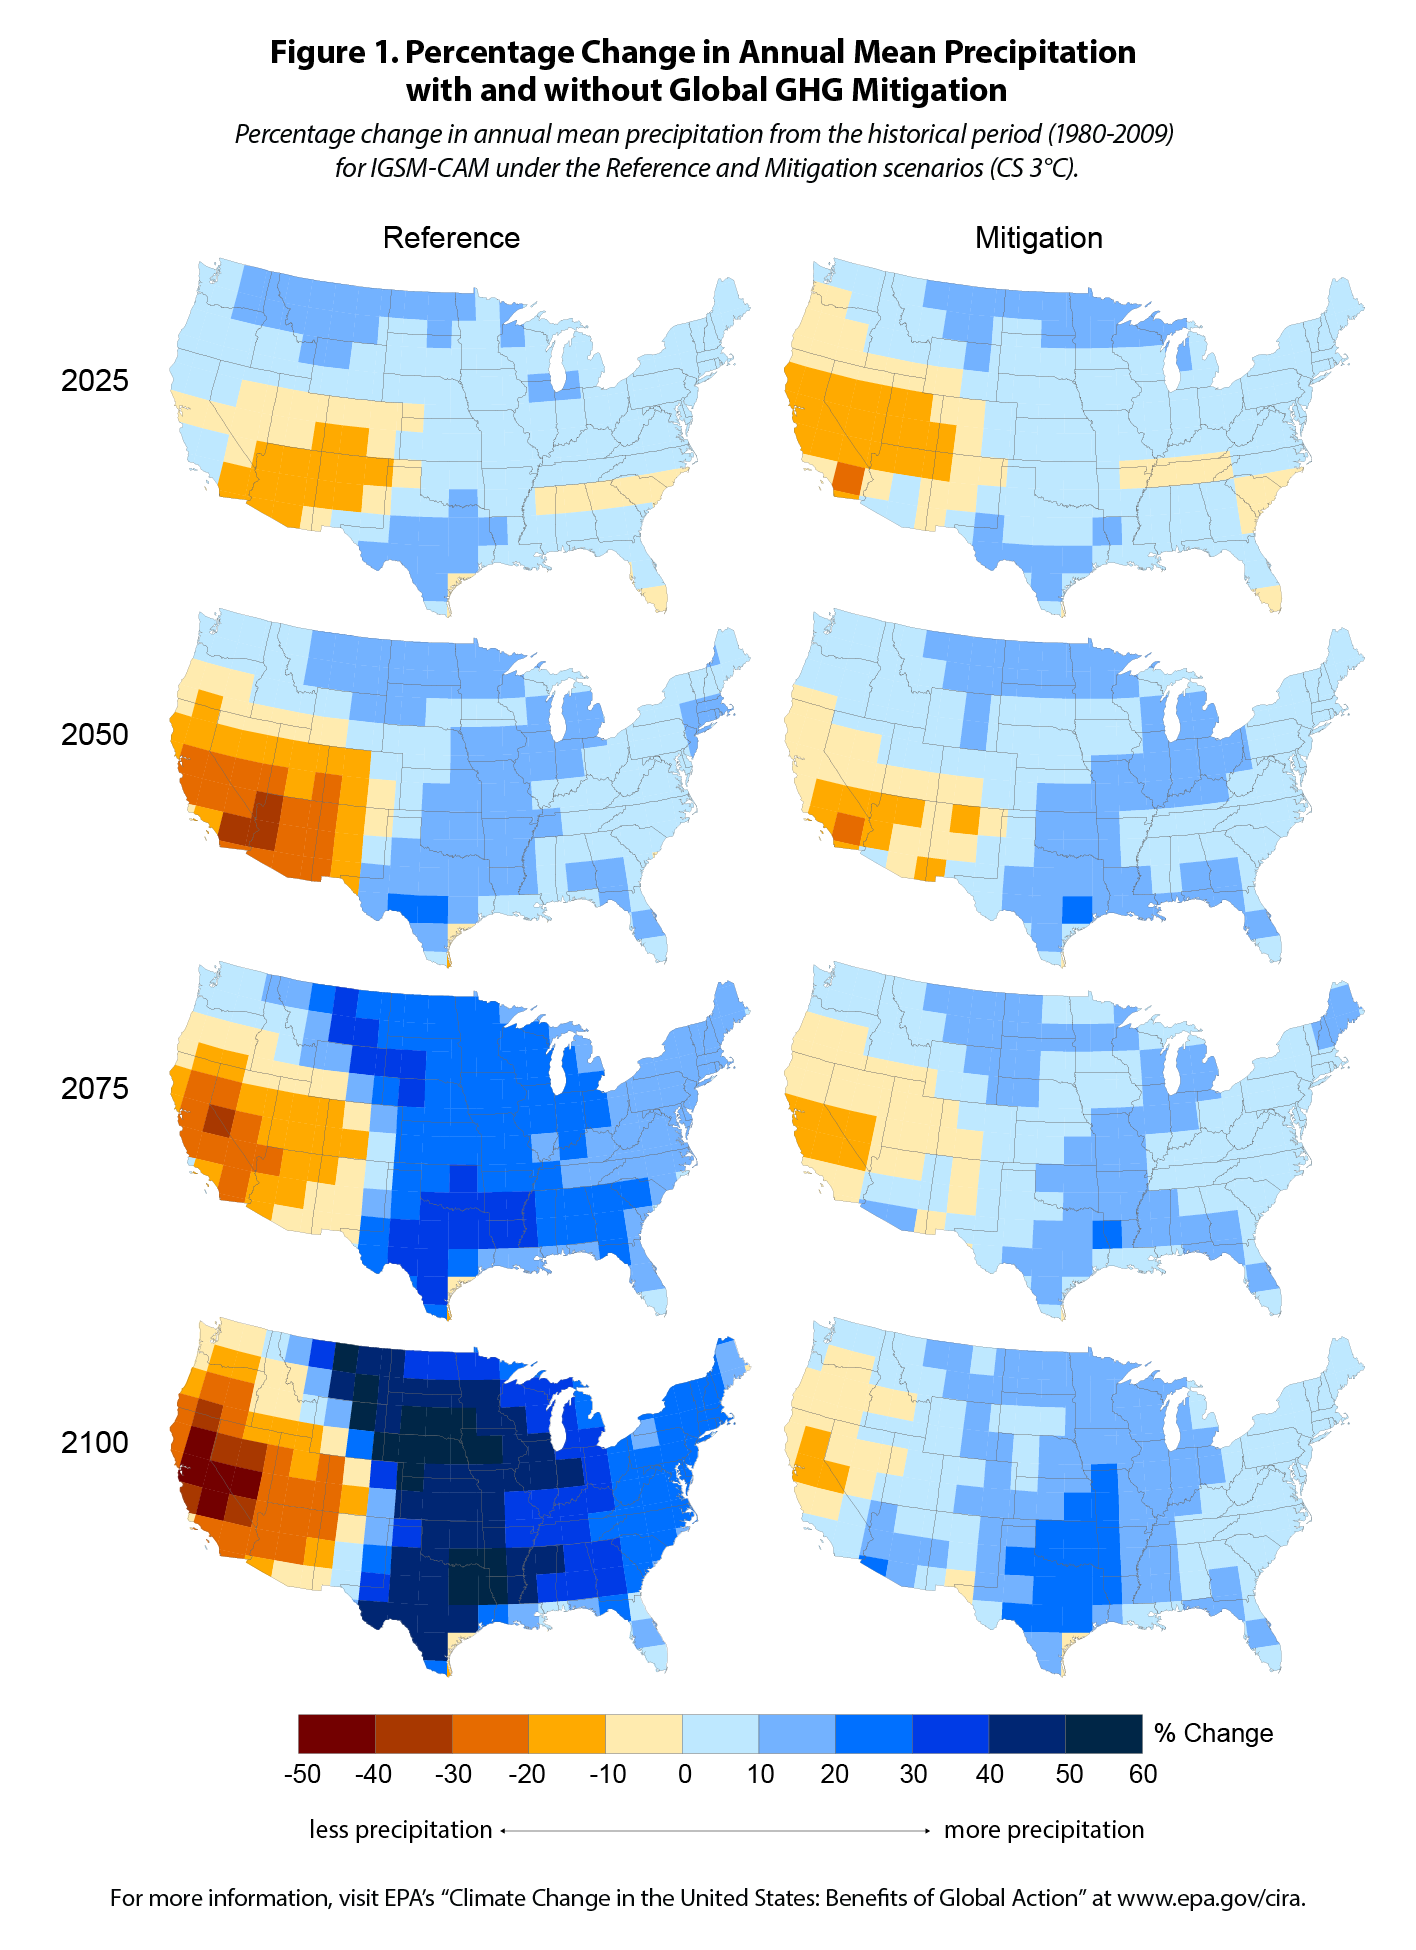 Percentage Change in Annual Mean Precipitation with and without Global GHG Mitigation